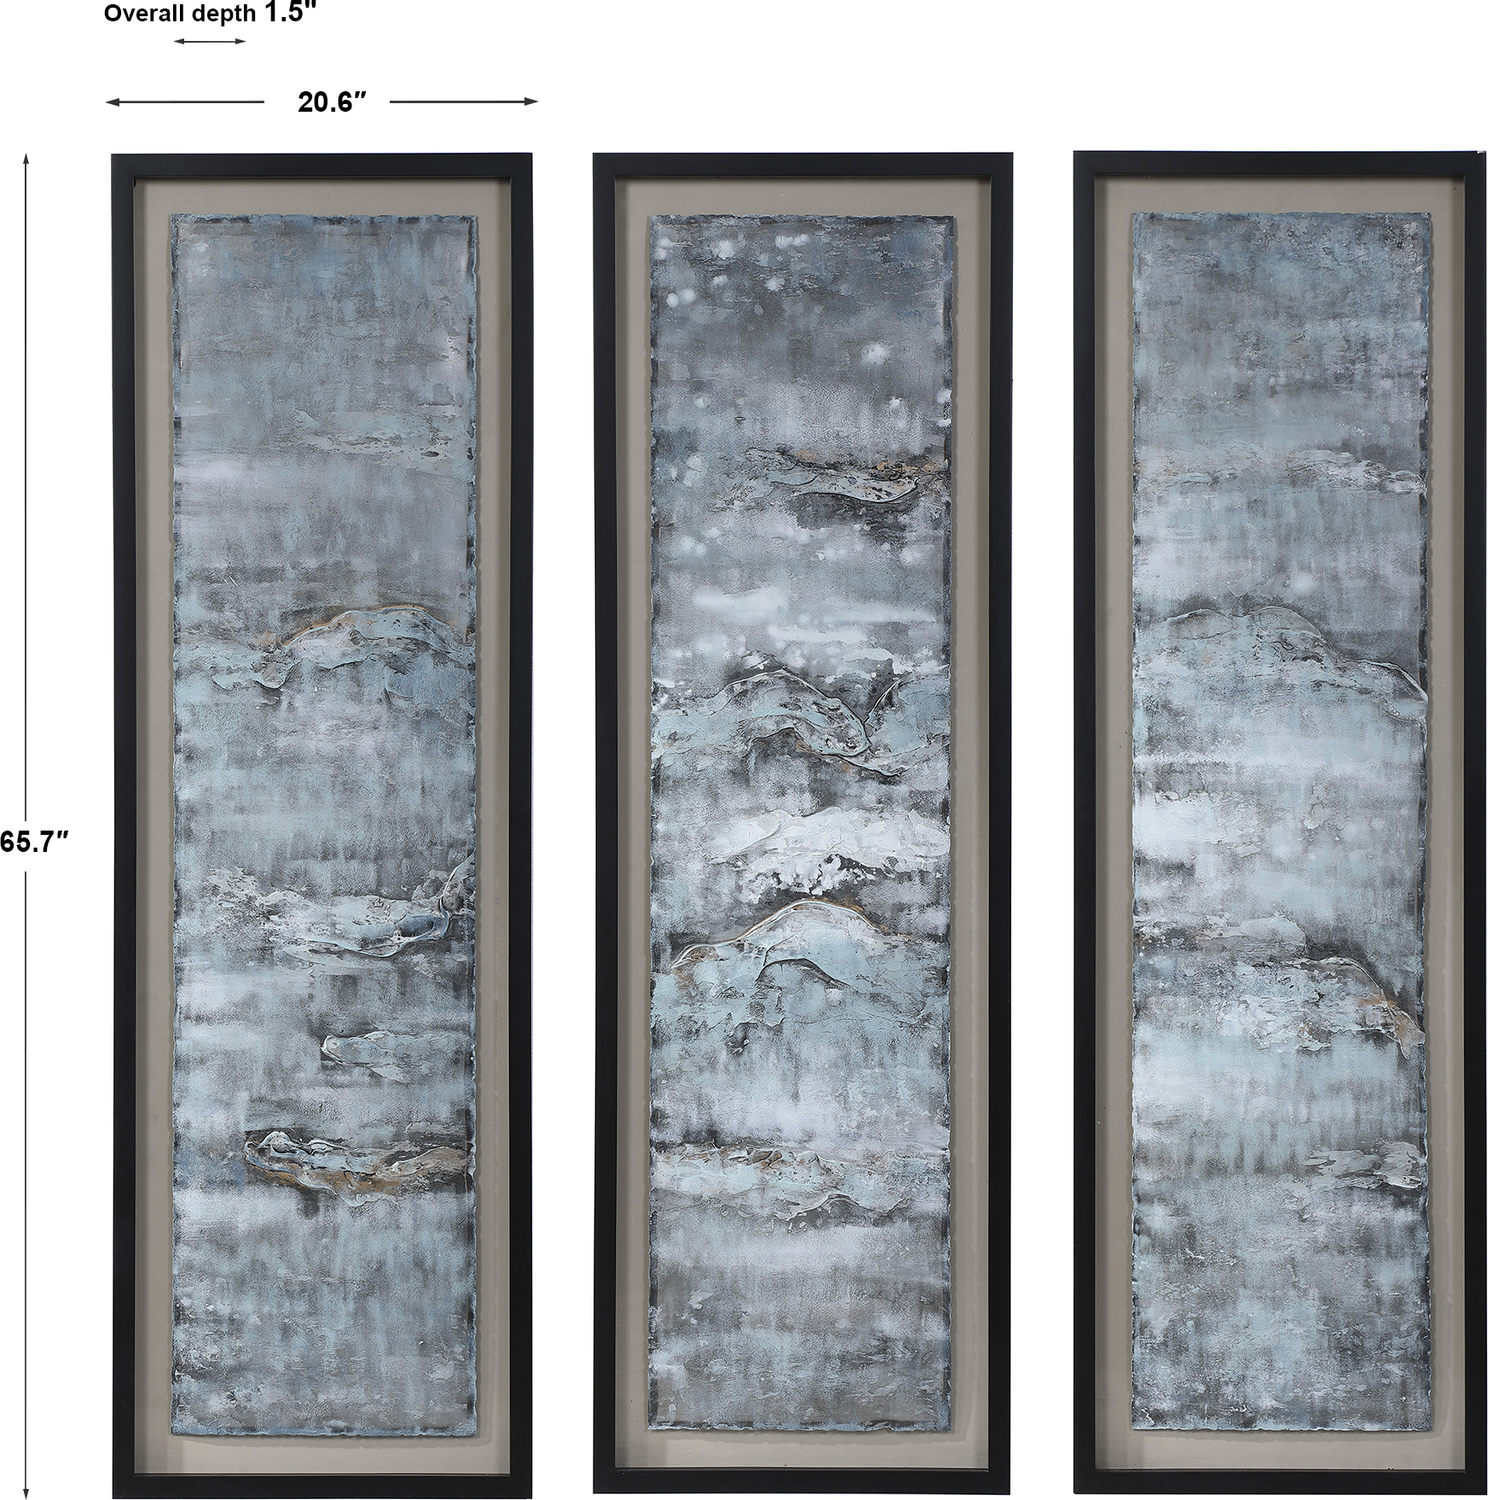 room art drawing Uttermost Abstract Art Black Shadowbox Style Frame, Beige Linen Background, Shoreline, Gold Leaf, Aqua, Silver Leaf, Gray, White, Charcoal, Painted Texture, Hand Painted Metal Sheets, Raw Edge